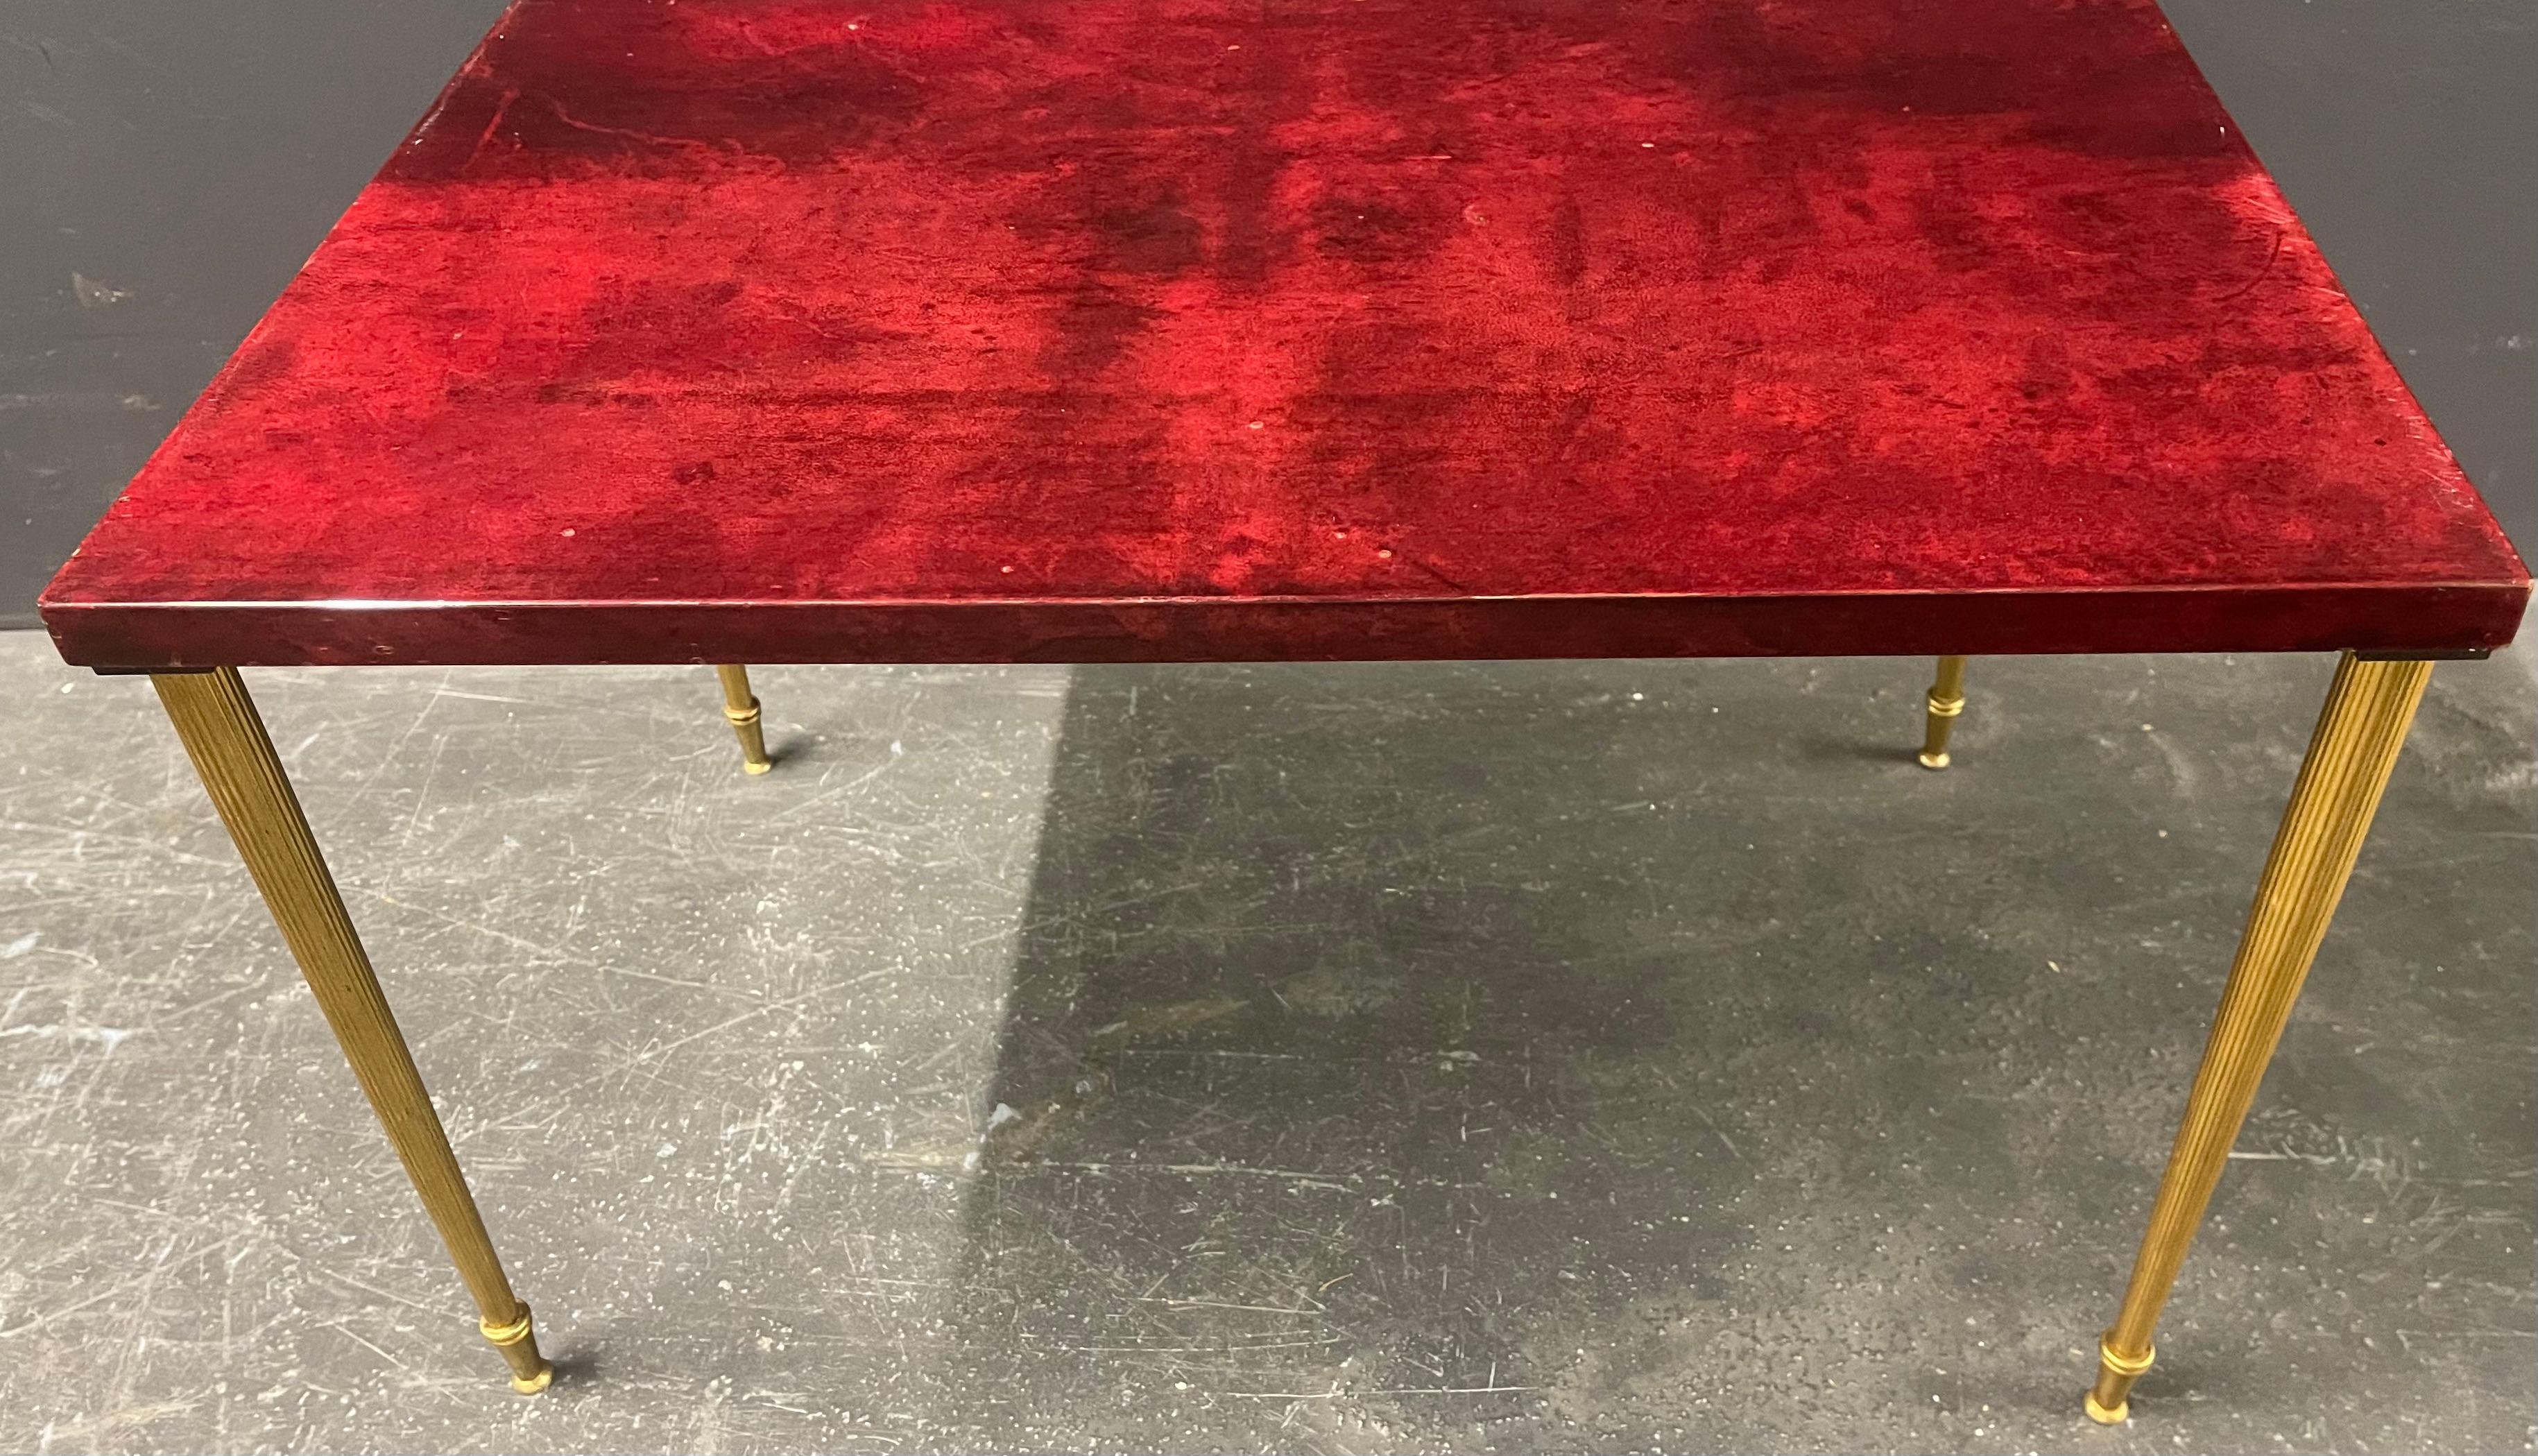 Brass nice aldo tura side table - great color For Sale